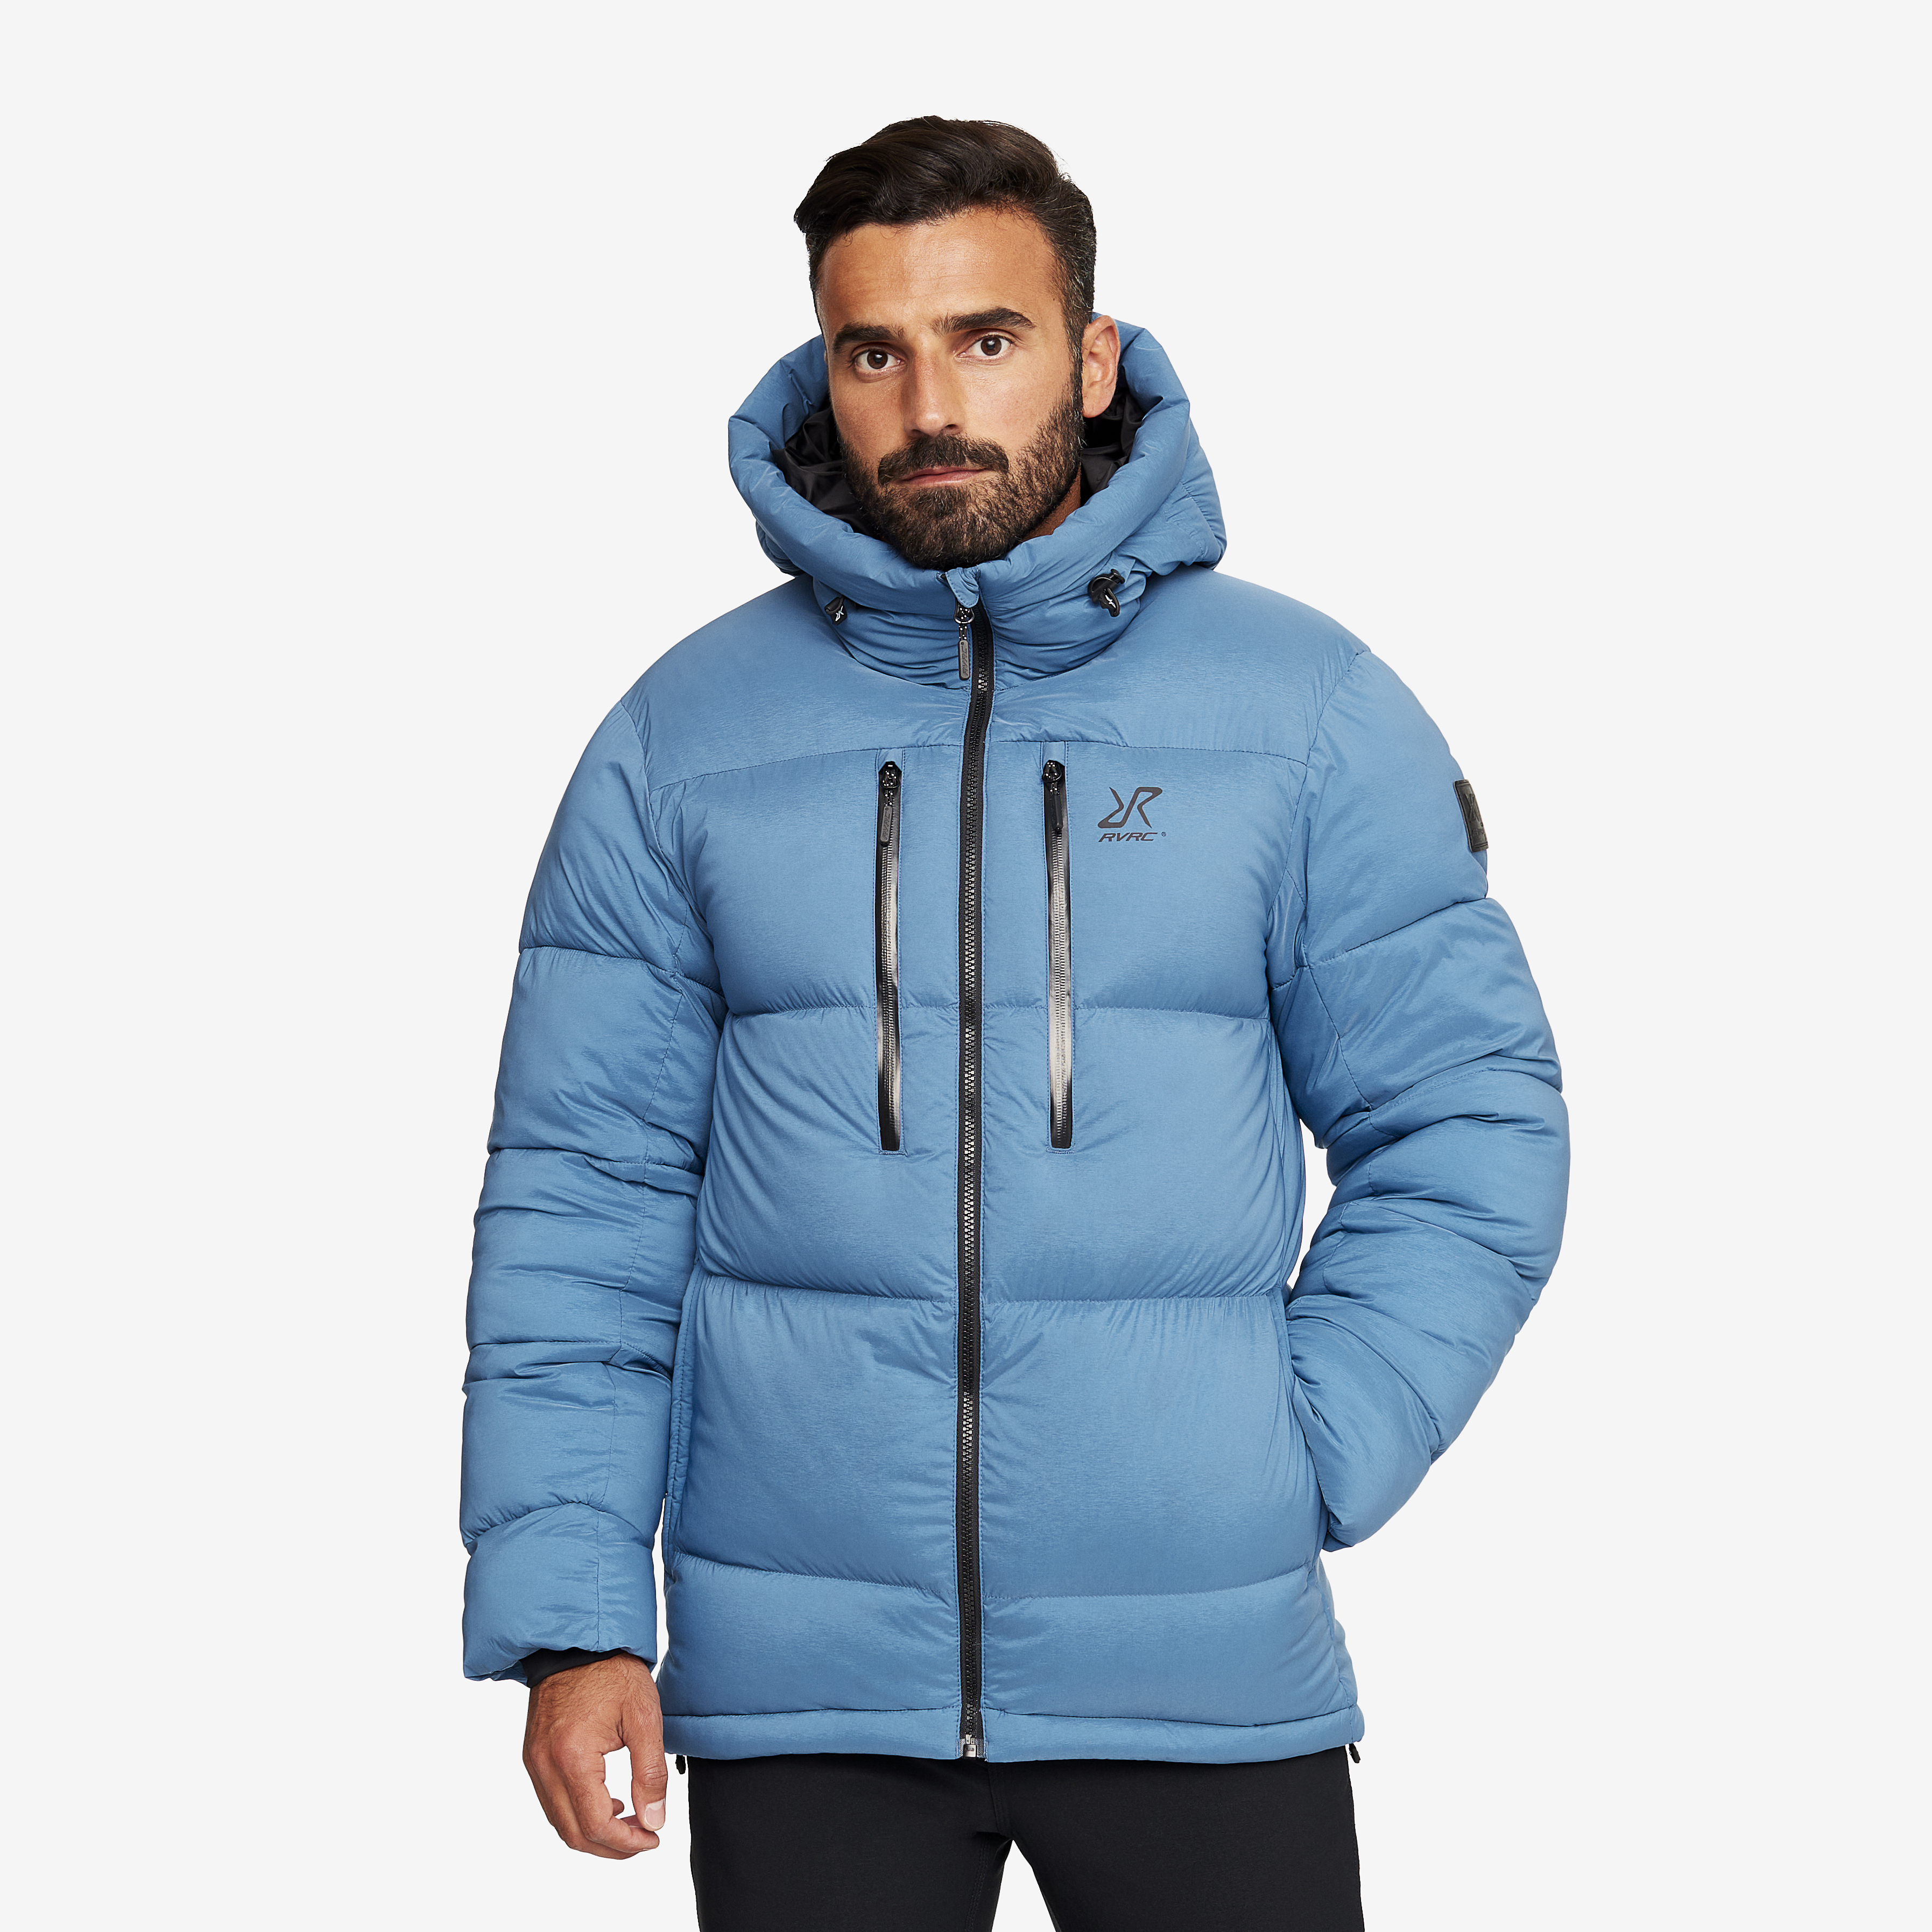 Flexpedition Jacket Pacific Blue Hombres